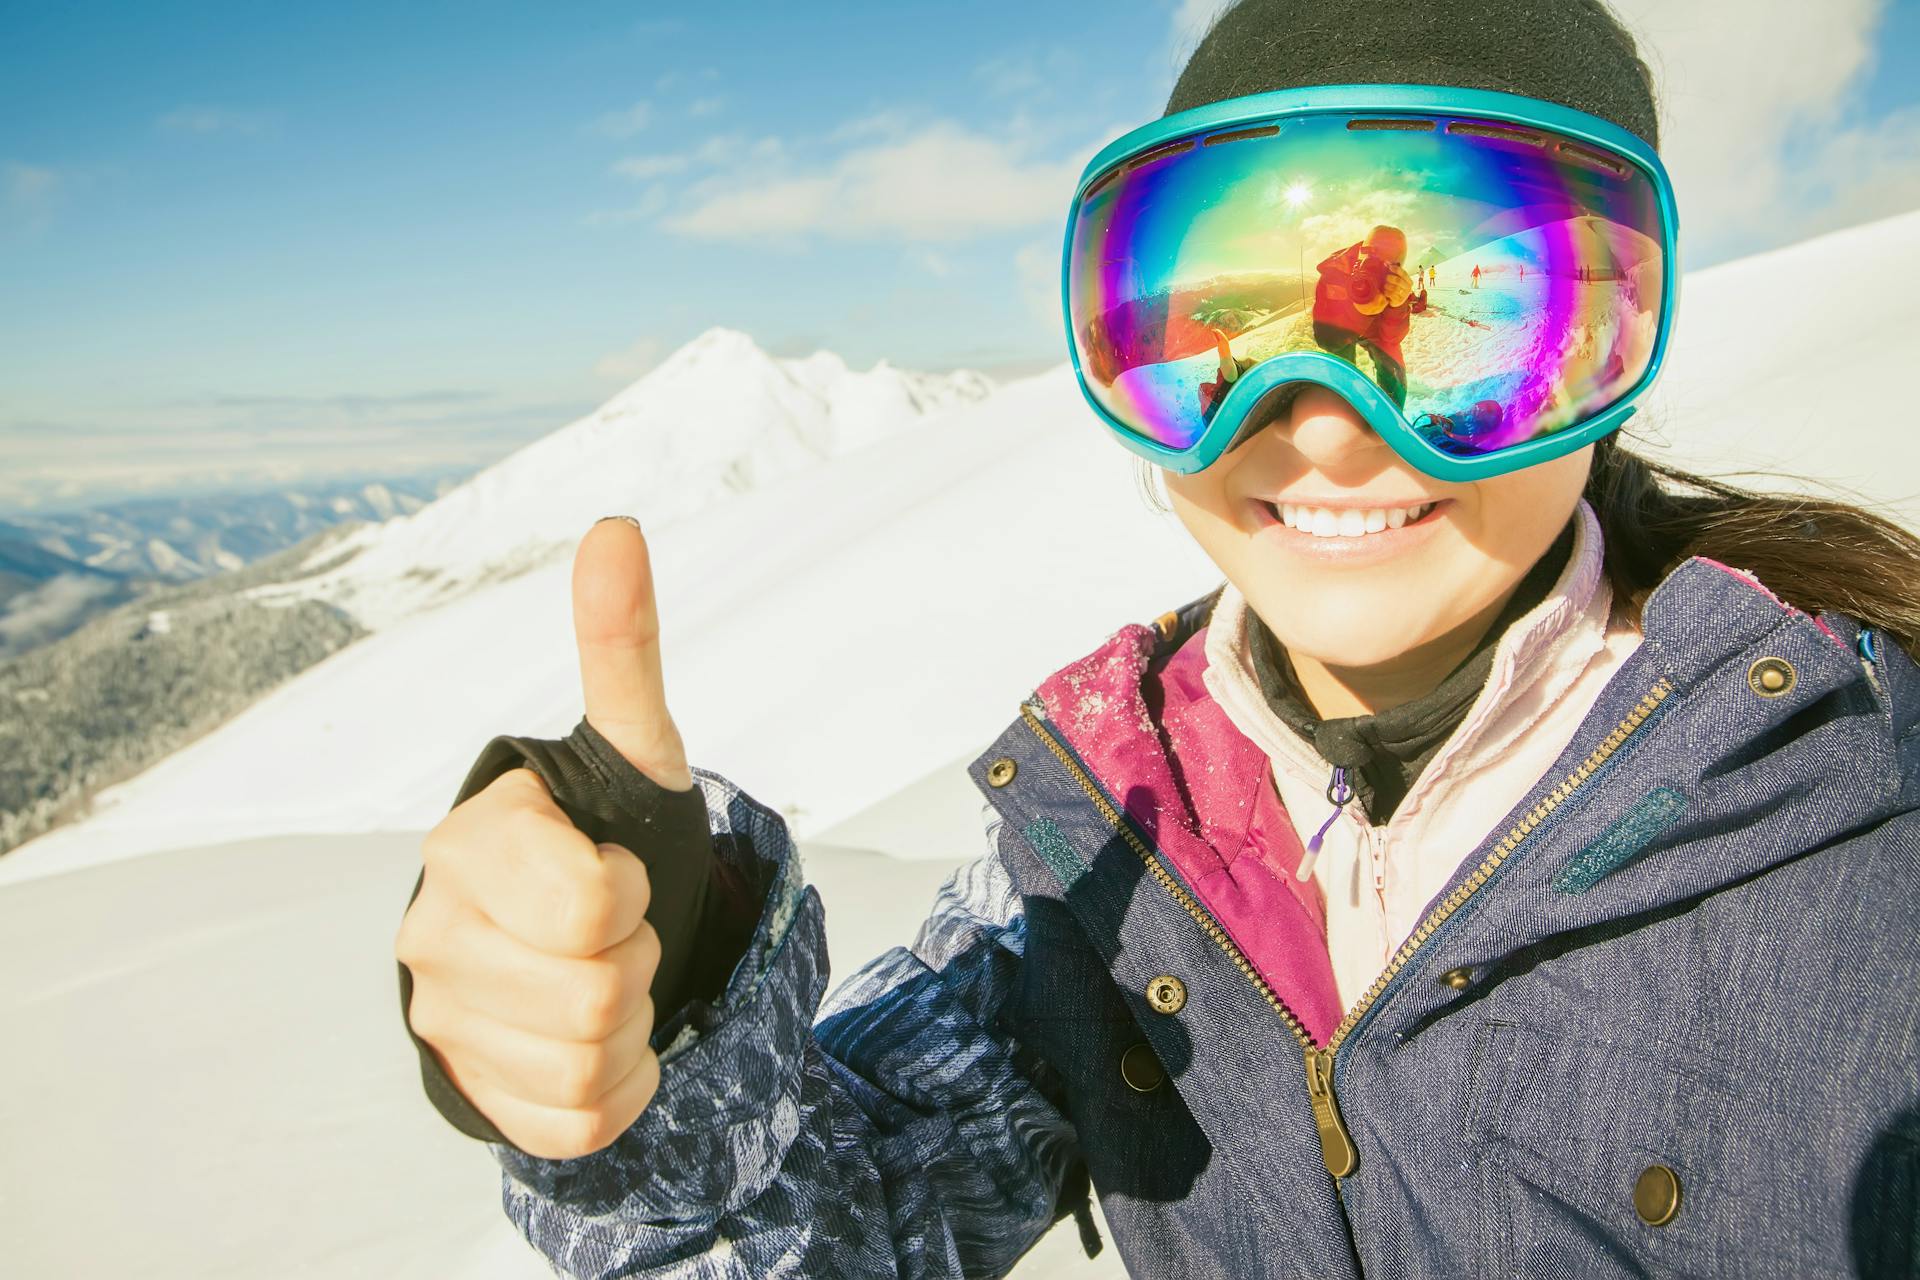 Skier in goggles gives the thumbs up